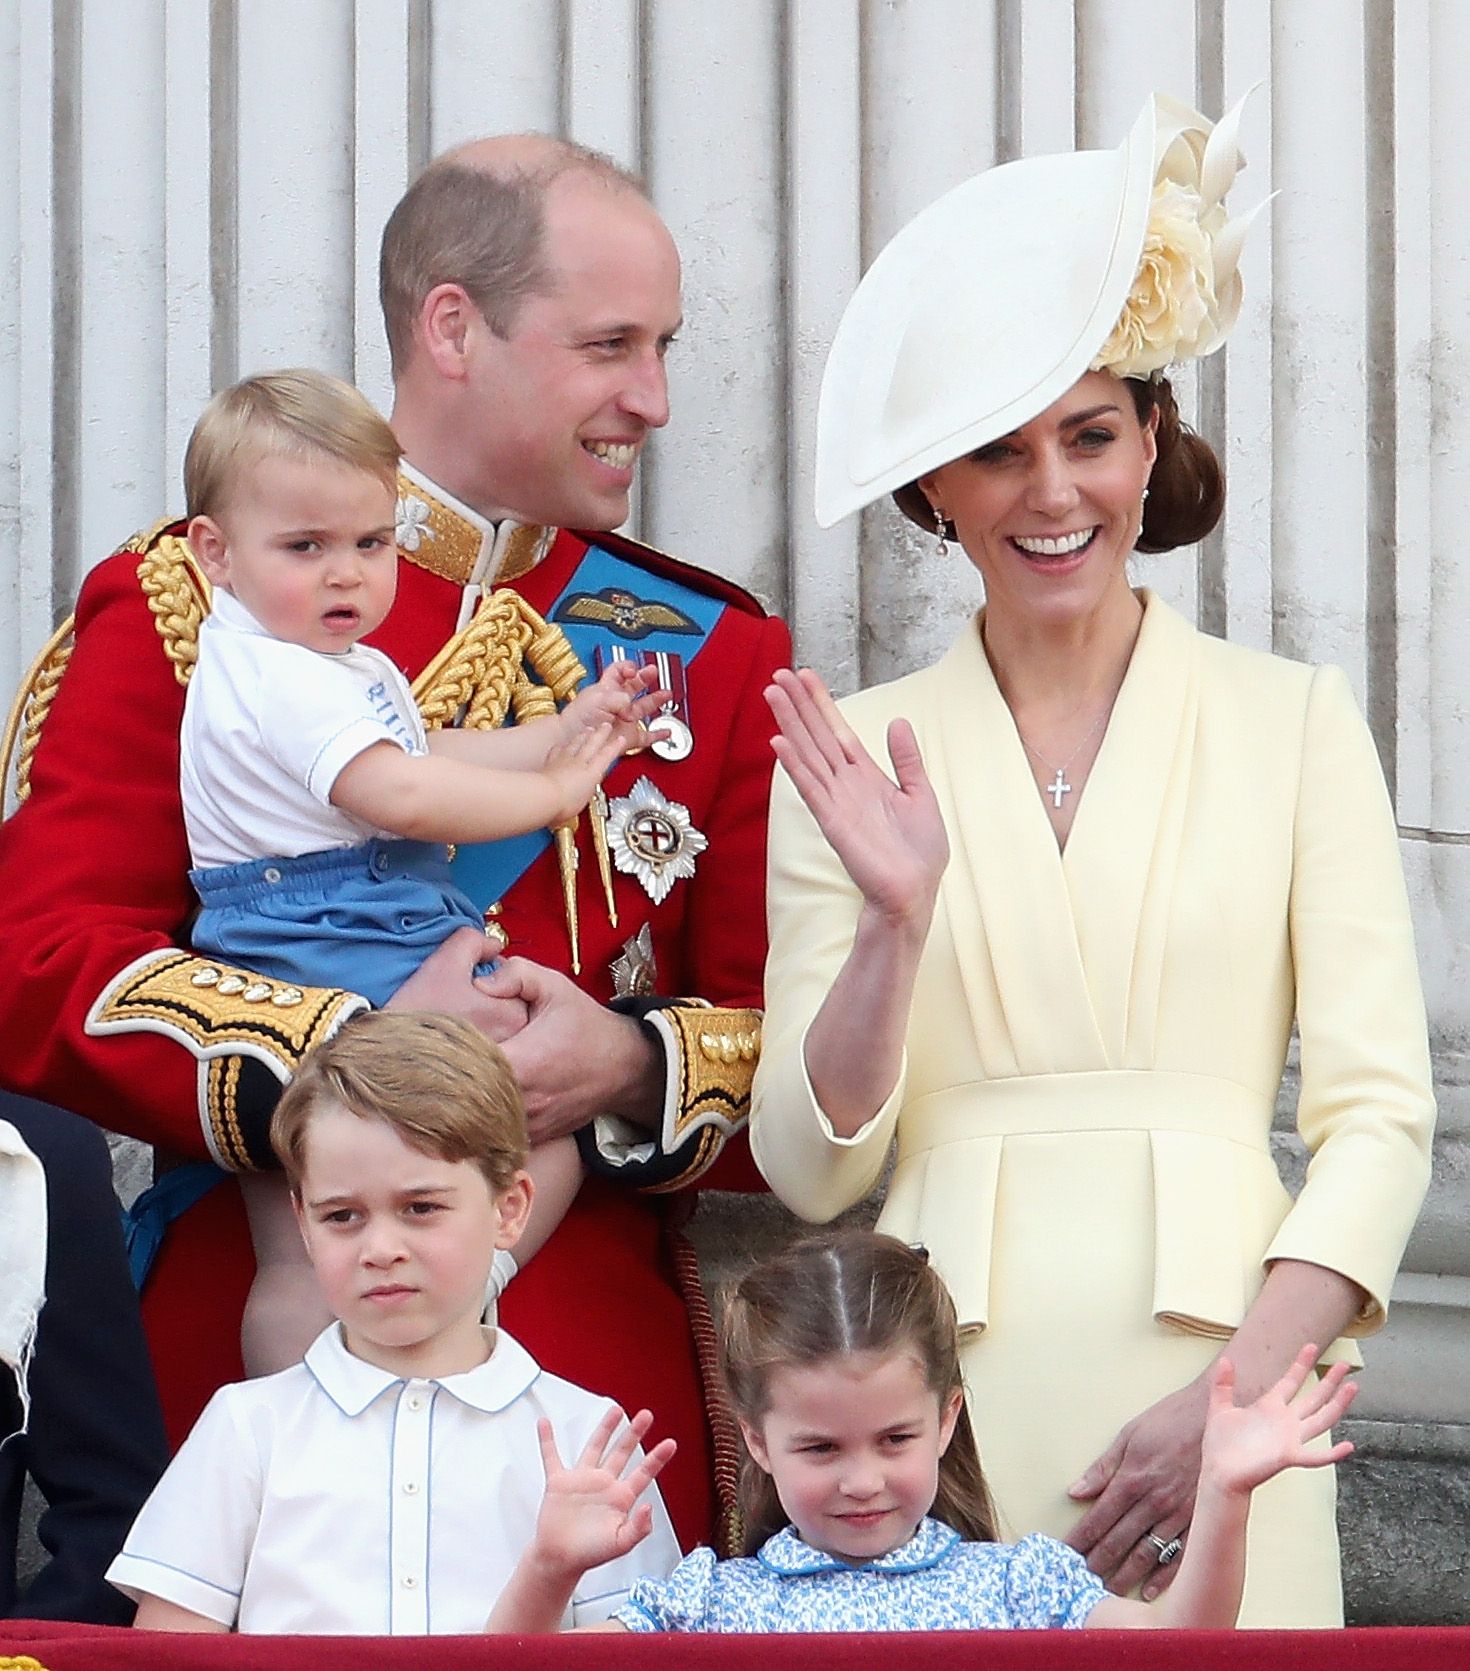 Prince William and Kate Middleton with Prince Louis, Prince George and Princess Charlotte during Trooping The Colour, on June 8, 2019 | Photo: Getty Images